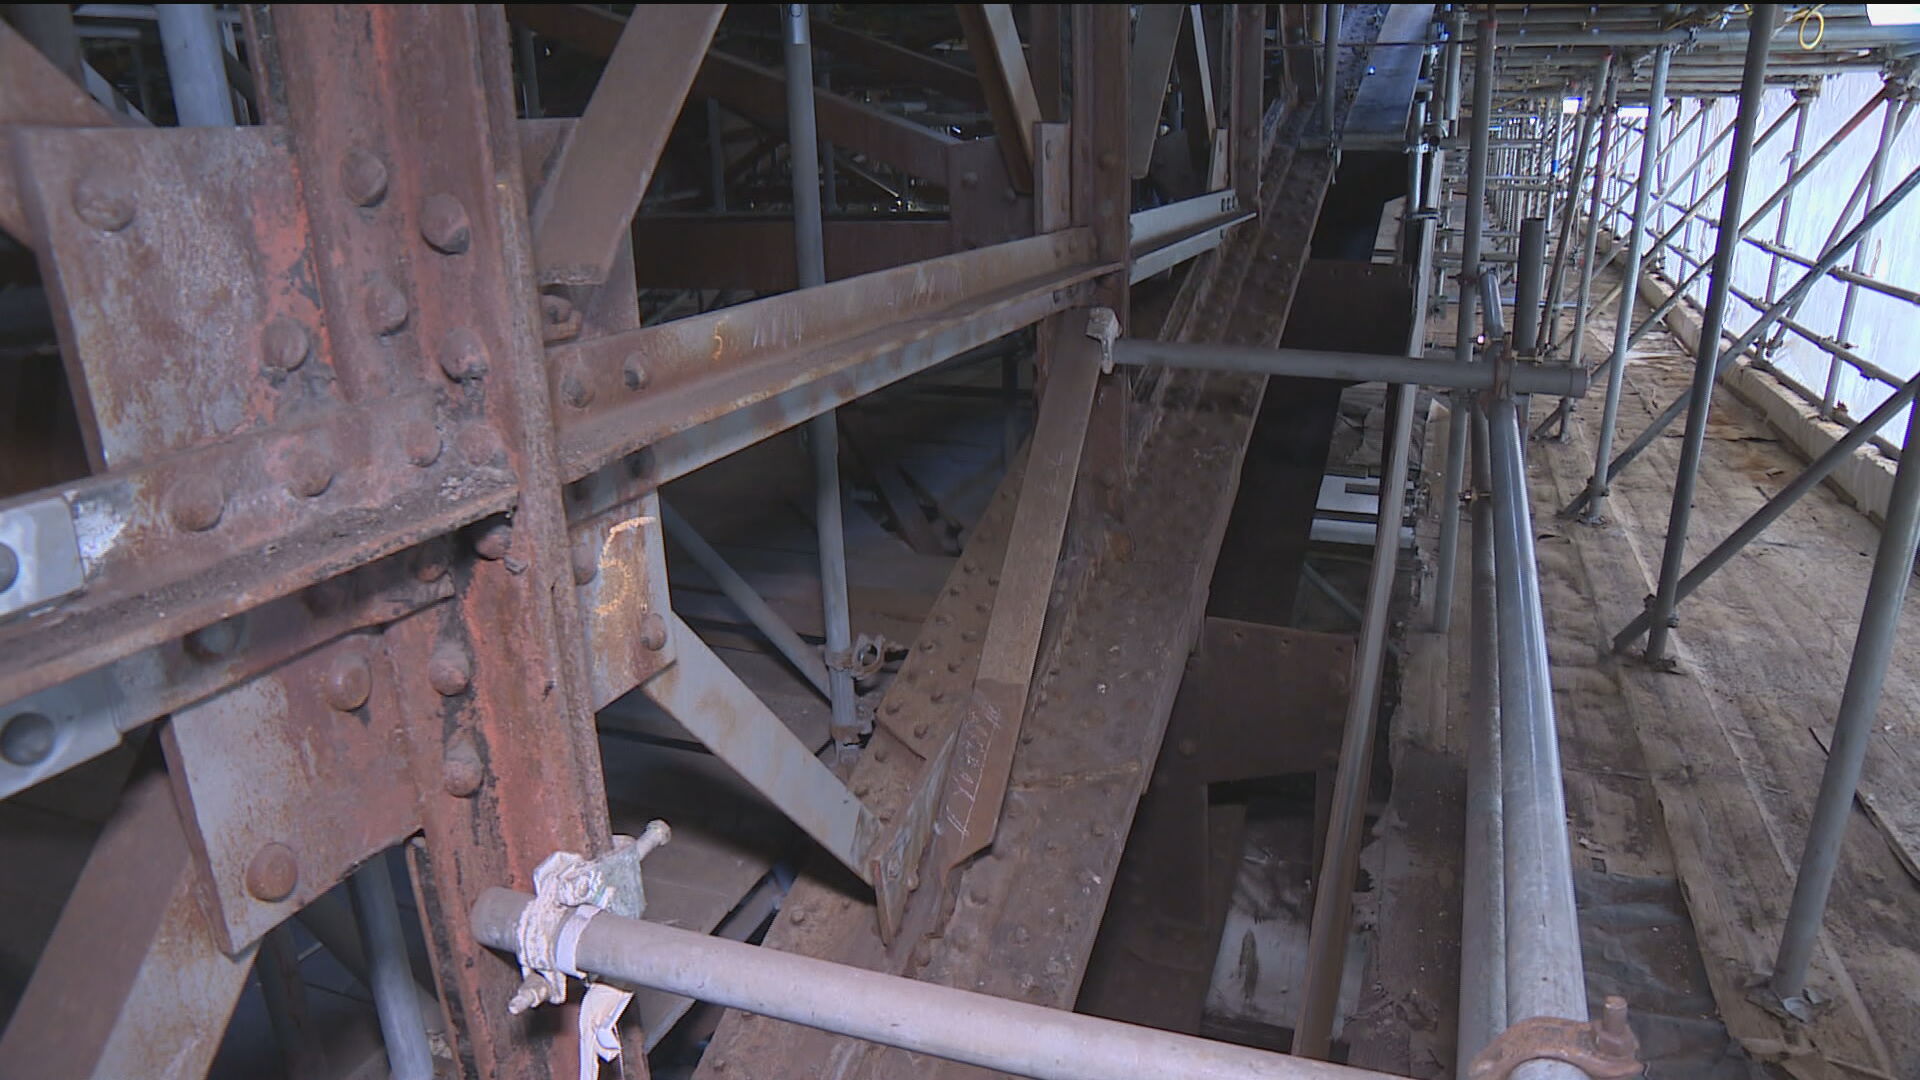 Much of the structural steelwork is corroded.